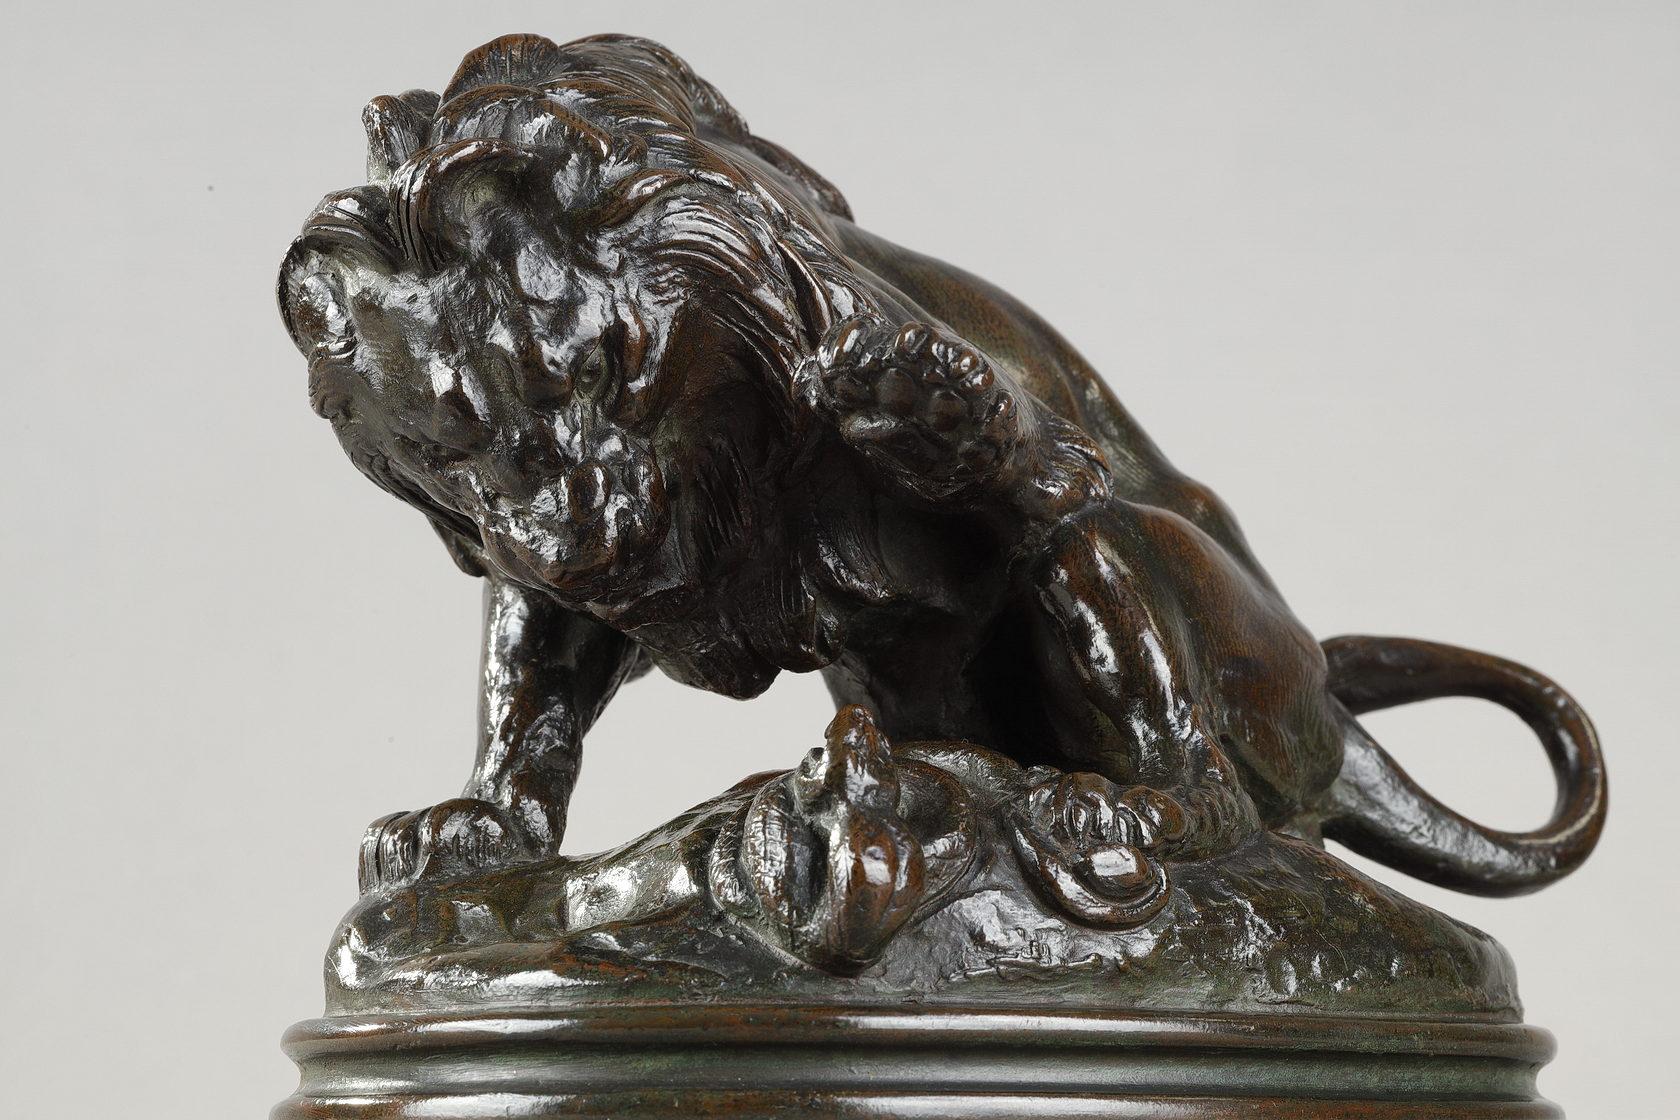 Lion and snake n°3
by Antoine-Louis Barye (1796-1875)

Bronze sculpture with a nuanced dark greenish brown patina
signed 